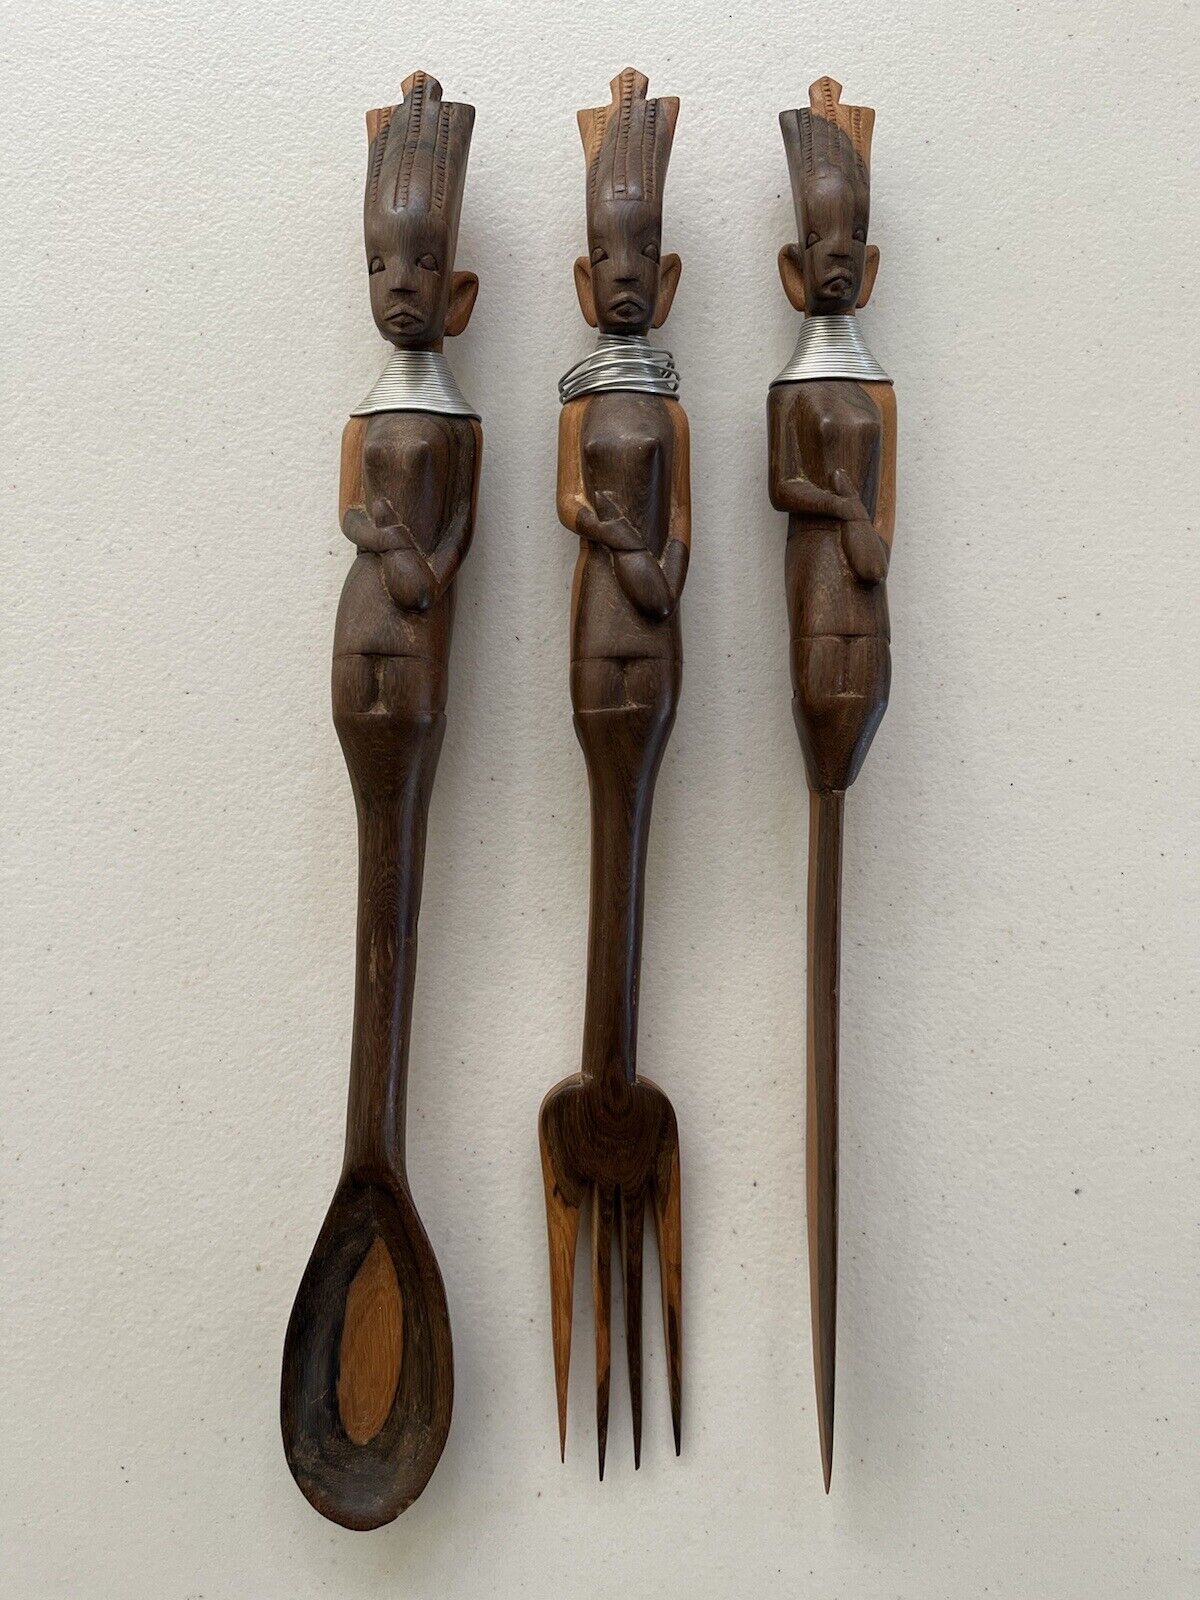 African Tribal Woman Spoon Fork And Knife Wood Carved 12” Long Serving decor